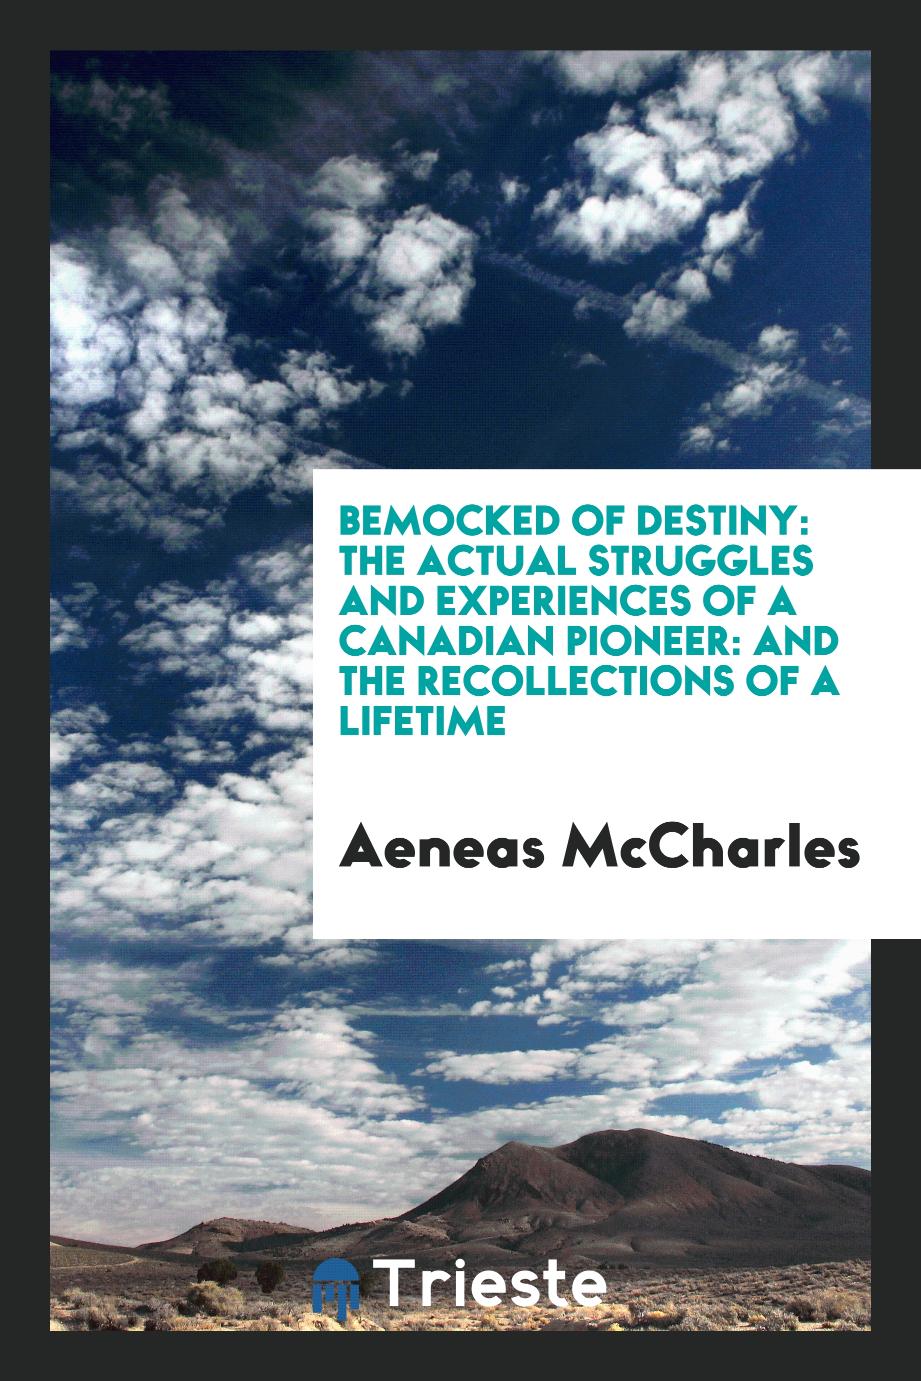 Bemocked of destiny: the actual struggles and experiences of a Canadian pioneer: and the recollections of a lifetime